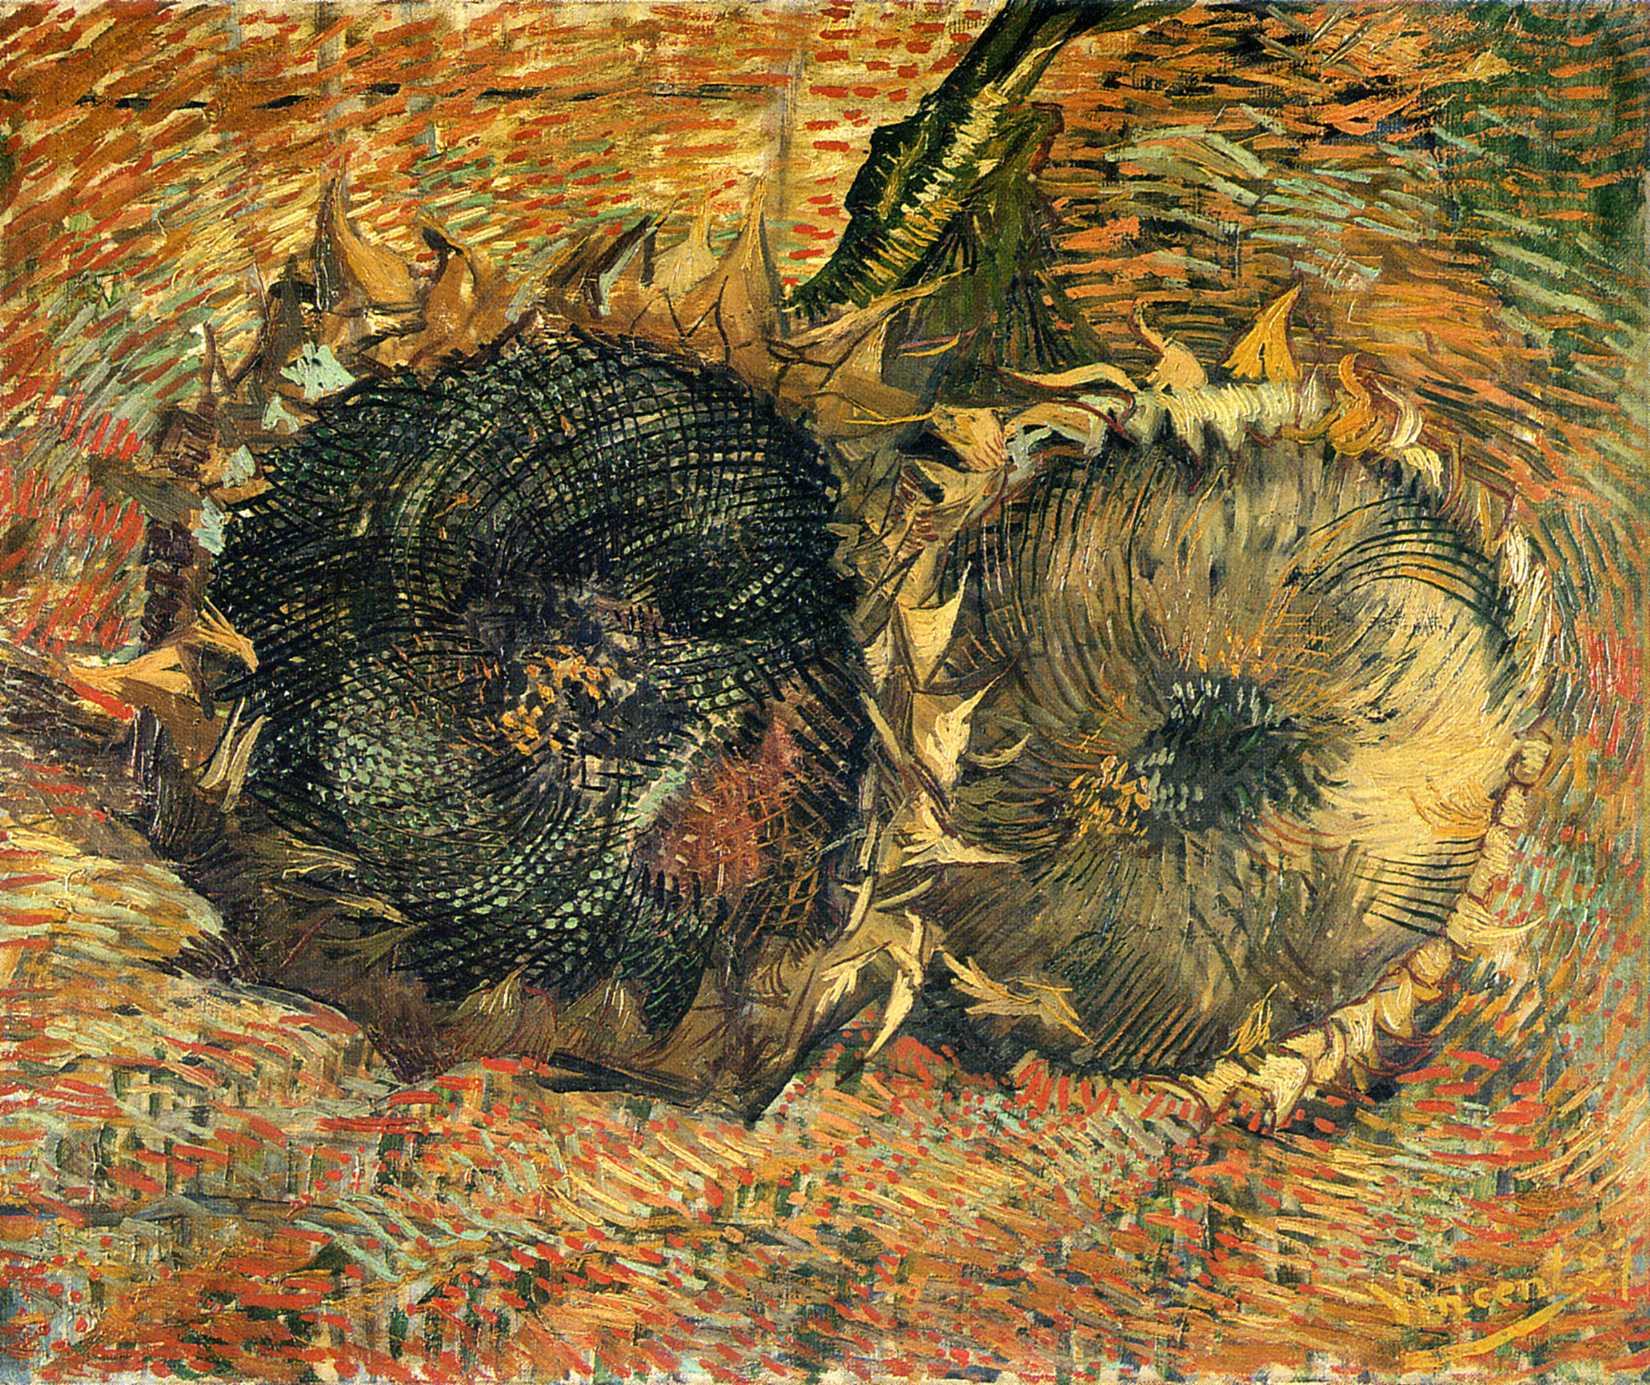 Famous Artwork Sunflowers HD Photos Gallery